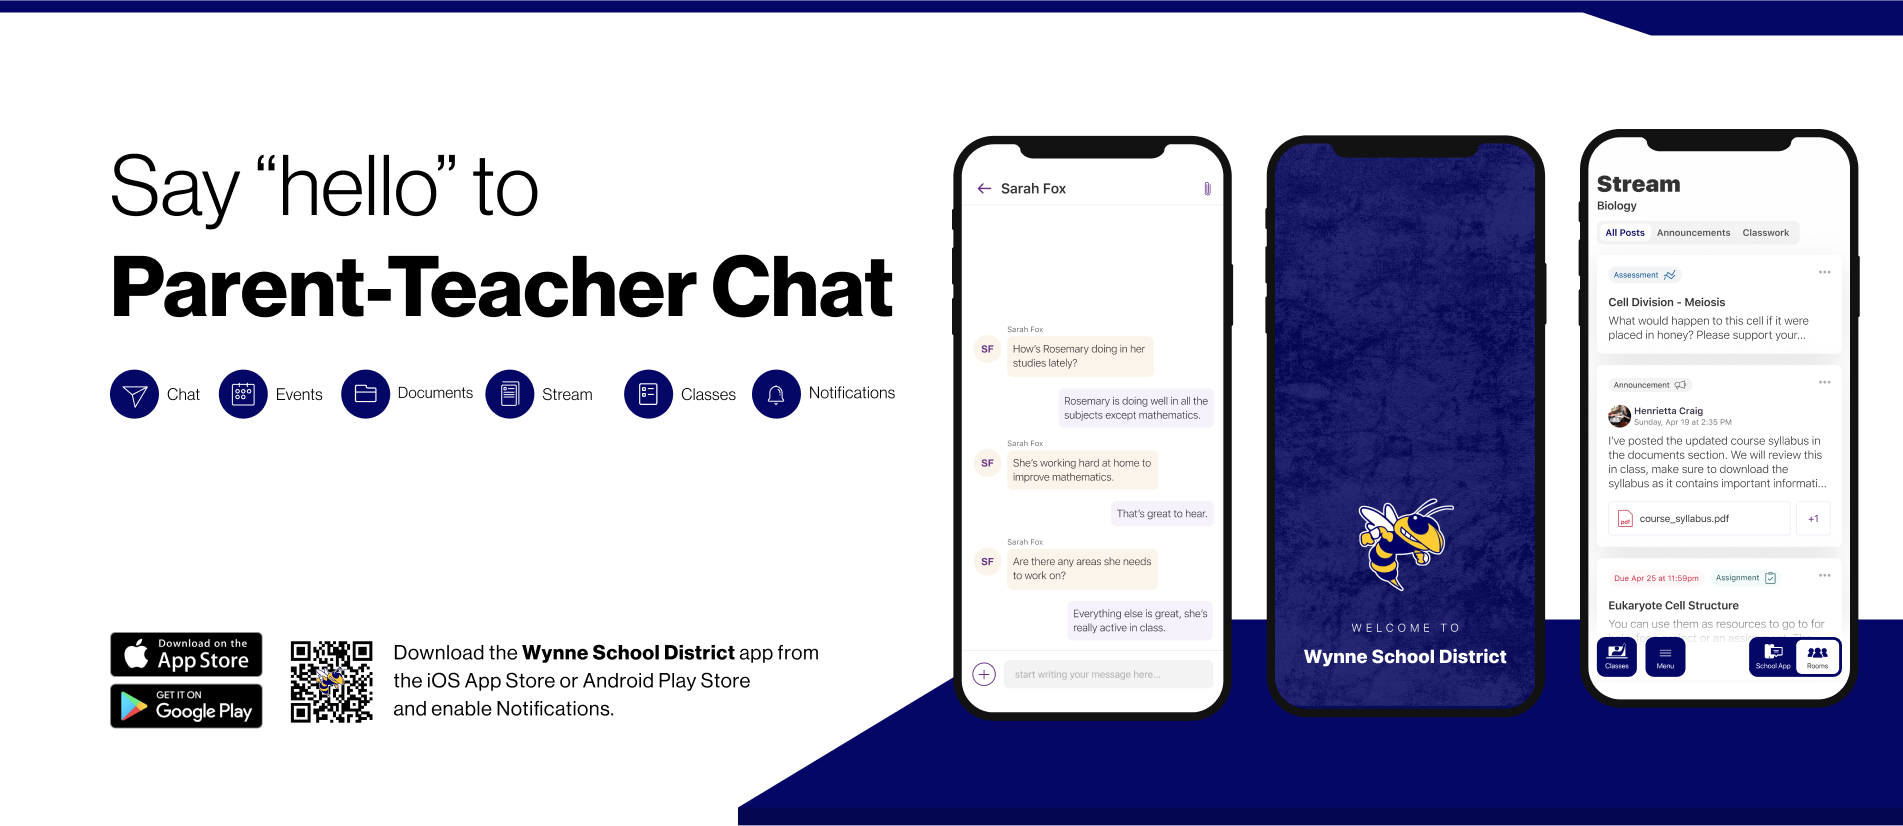 “Say hello to Parent-Teacher chat in the new Rooms app. Download the Wynne School District app in the Google Play or Apple App store